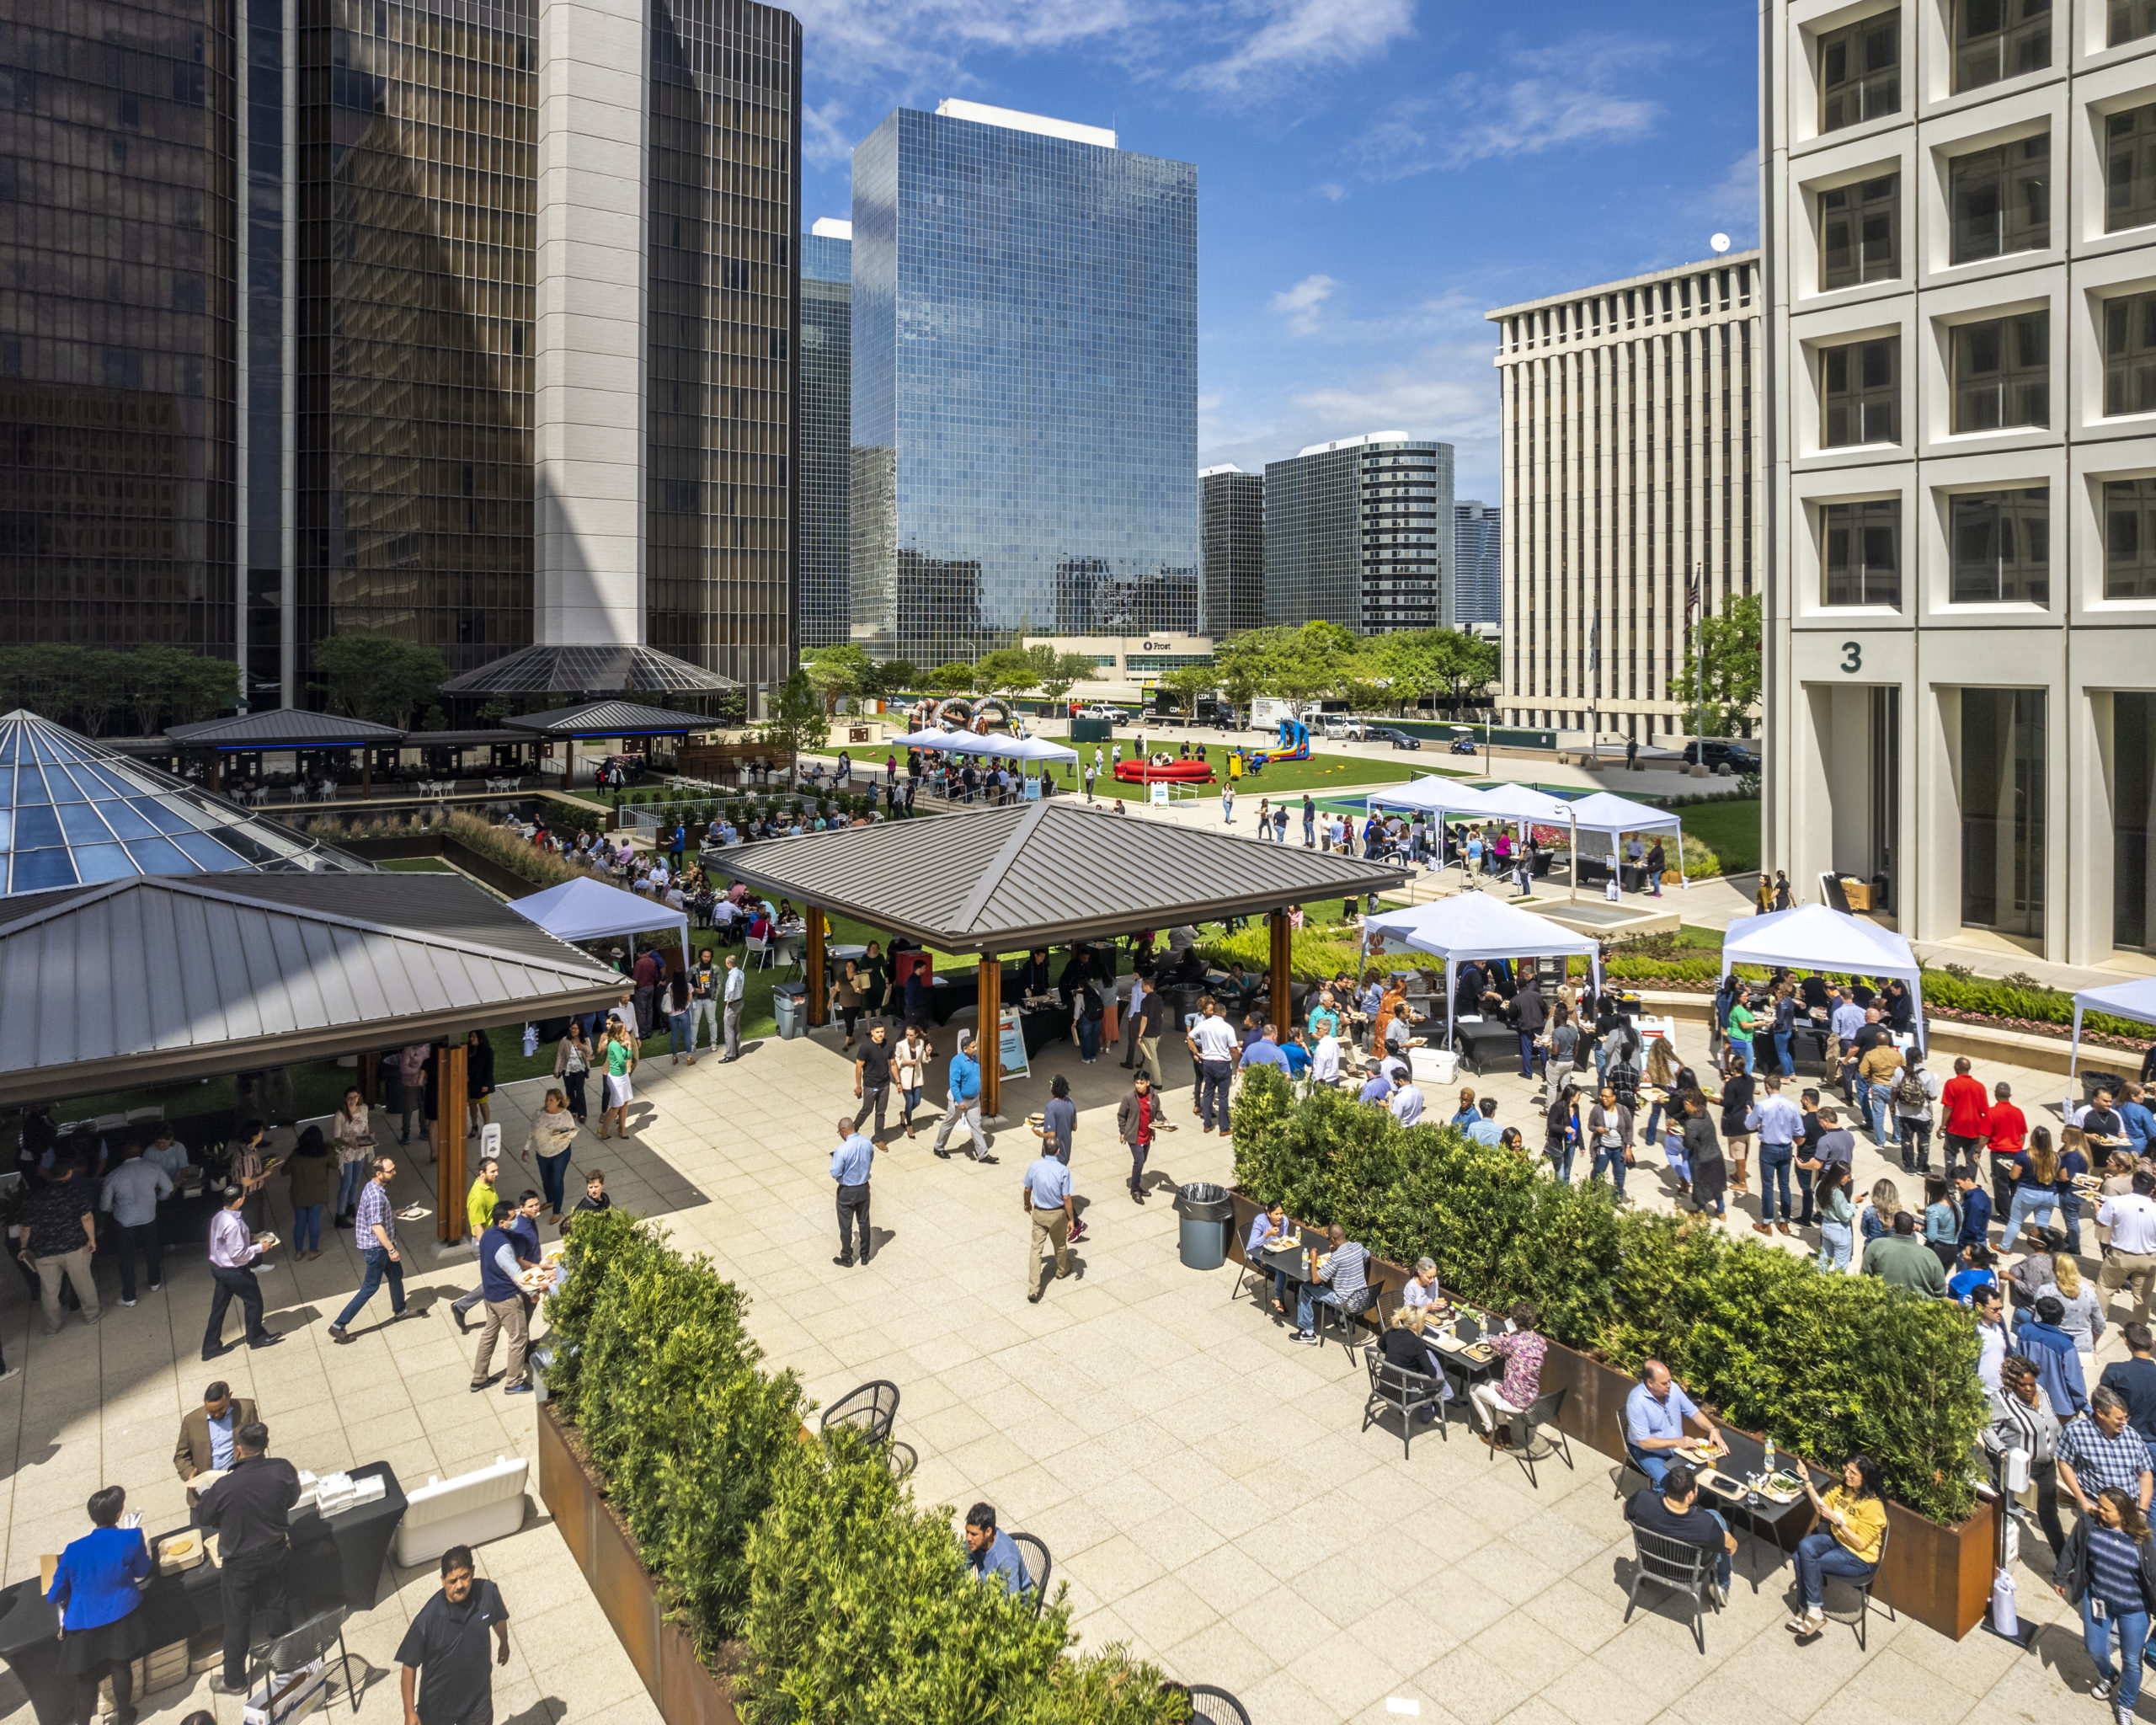 Invesco Signs Major Lease In Greenway Plaza Realty News Report